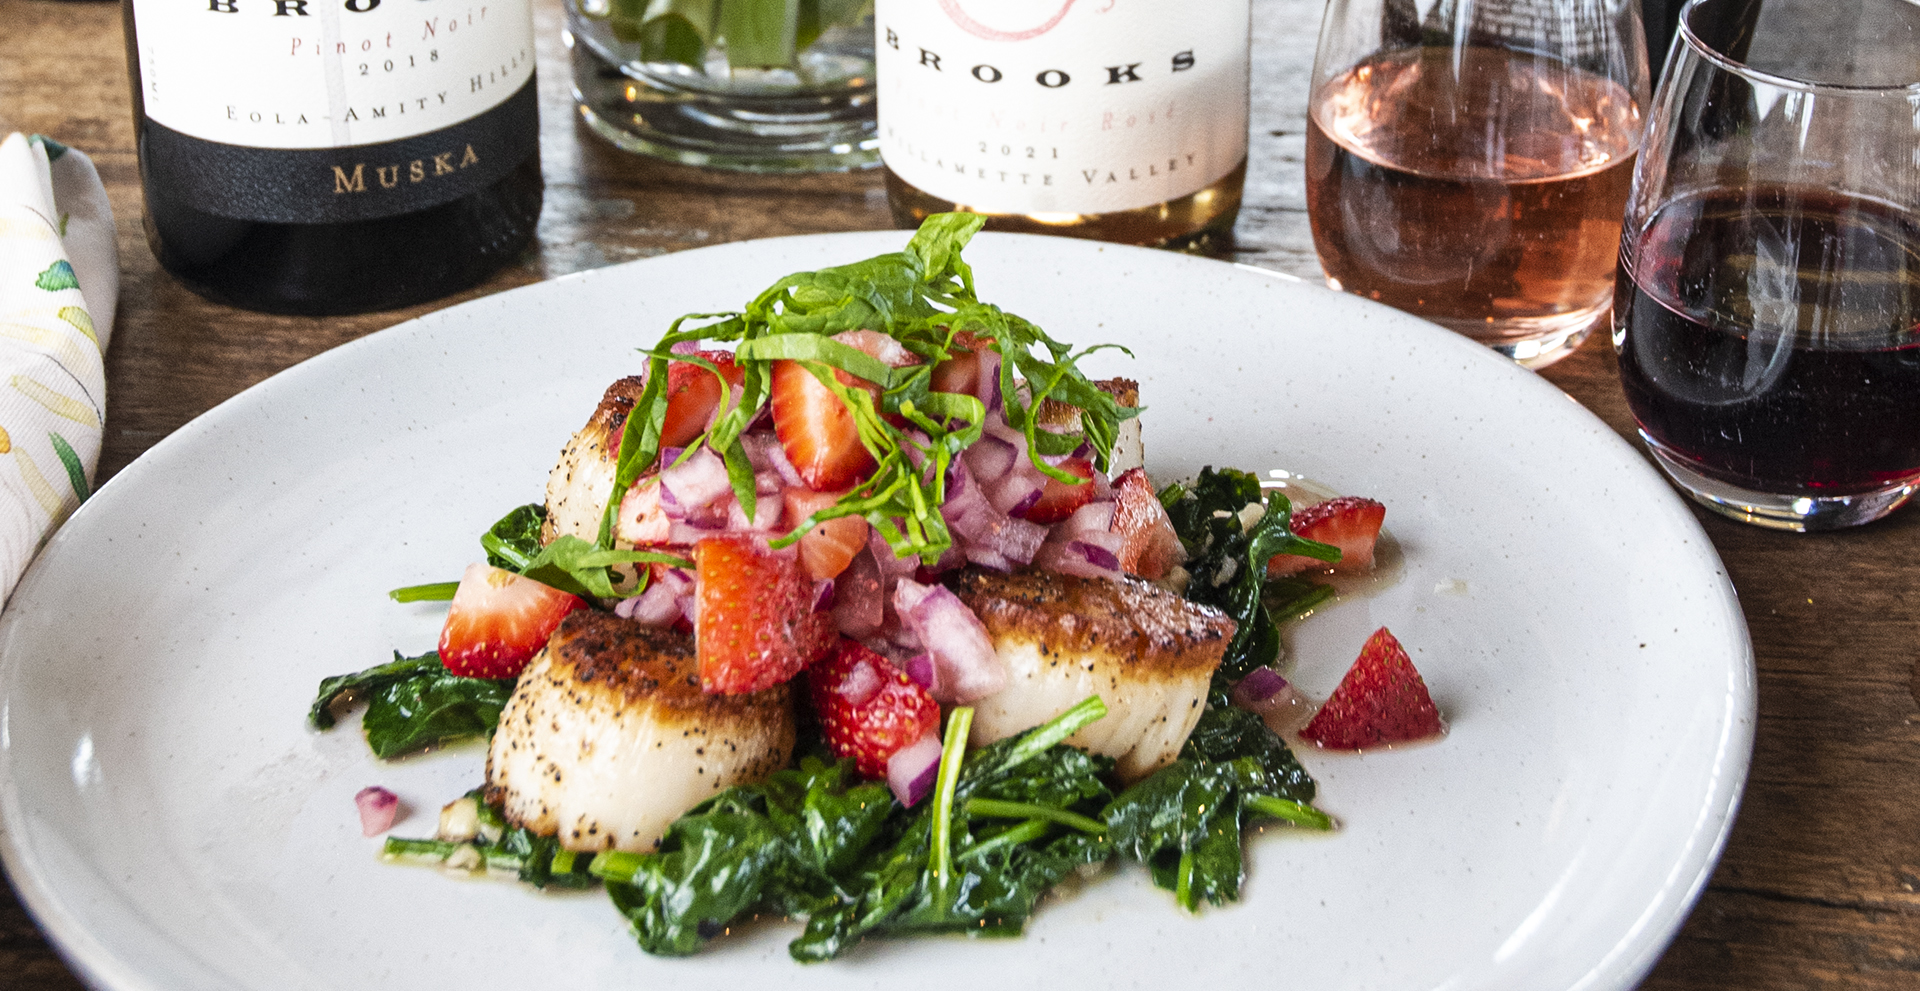 Seared sea scallops with a strawberry, red onion salsa and garlic-wilted spinach